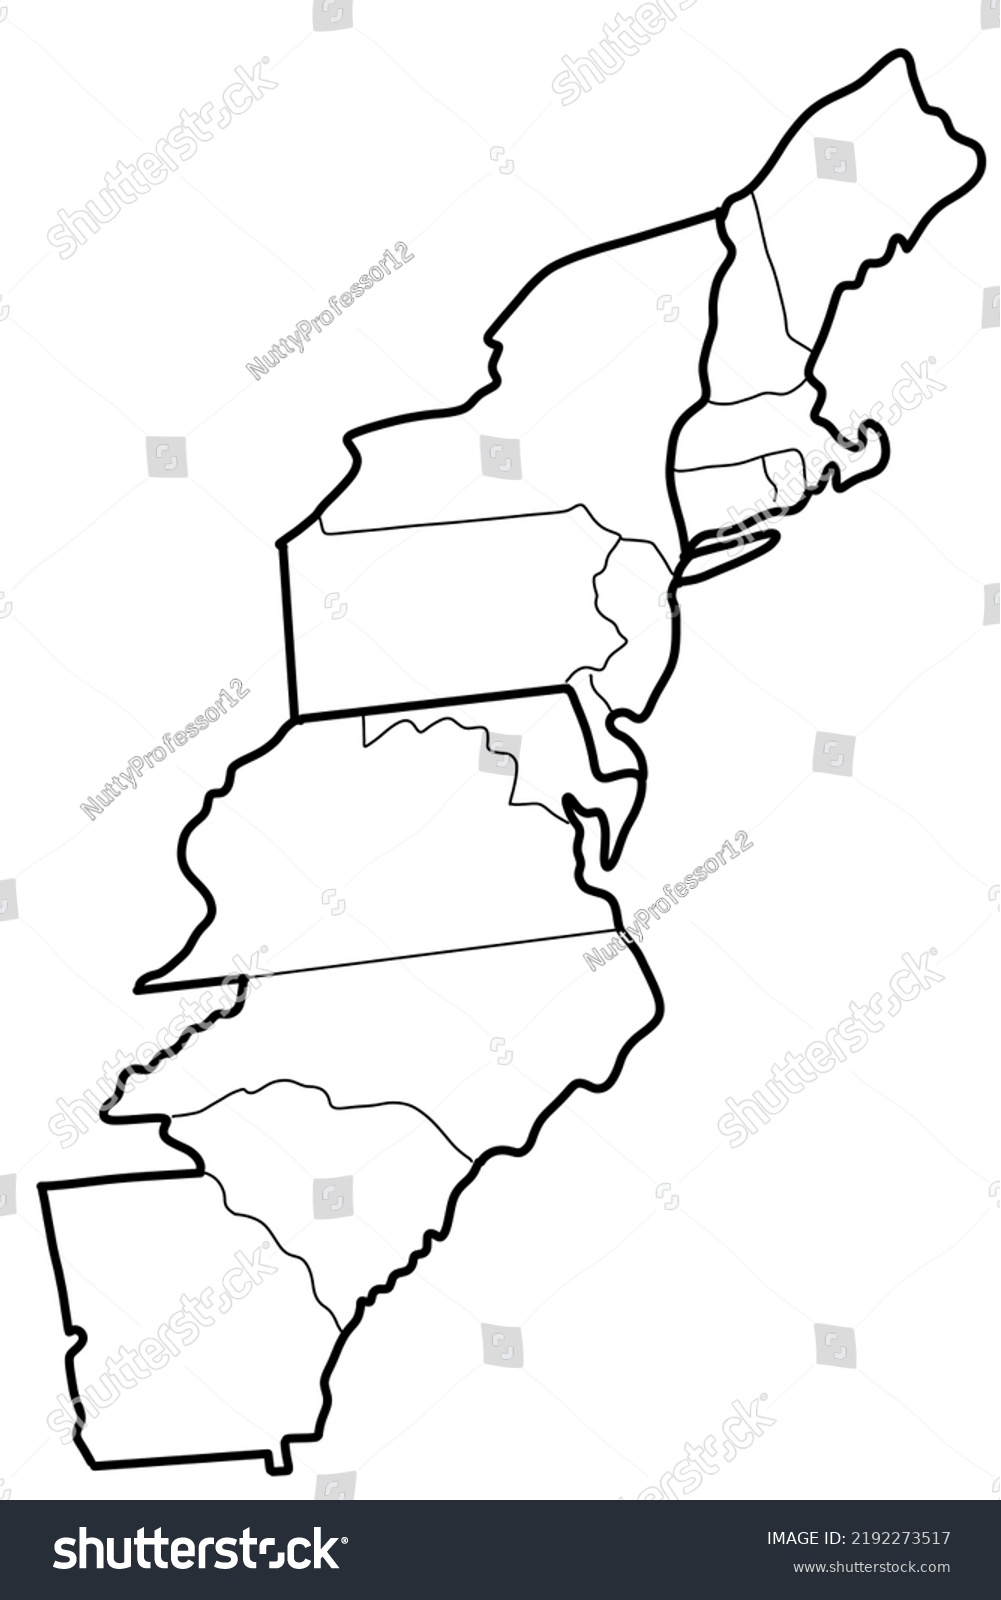 Stock Photo Thirteen Colonies Outline Map Black And White Line Illustration Of The Original Colonies 2192273517 